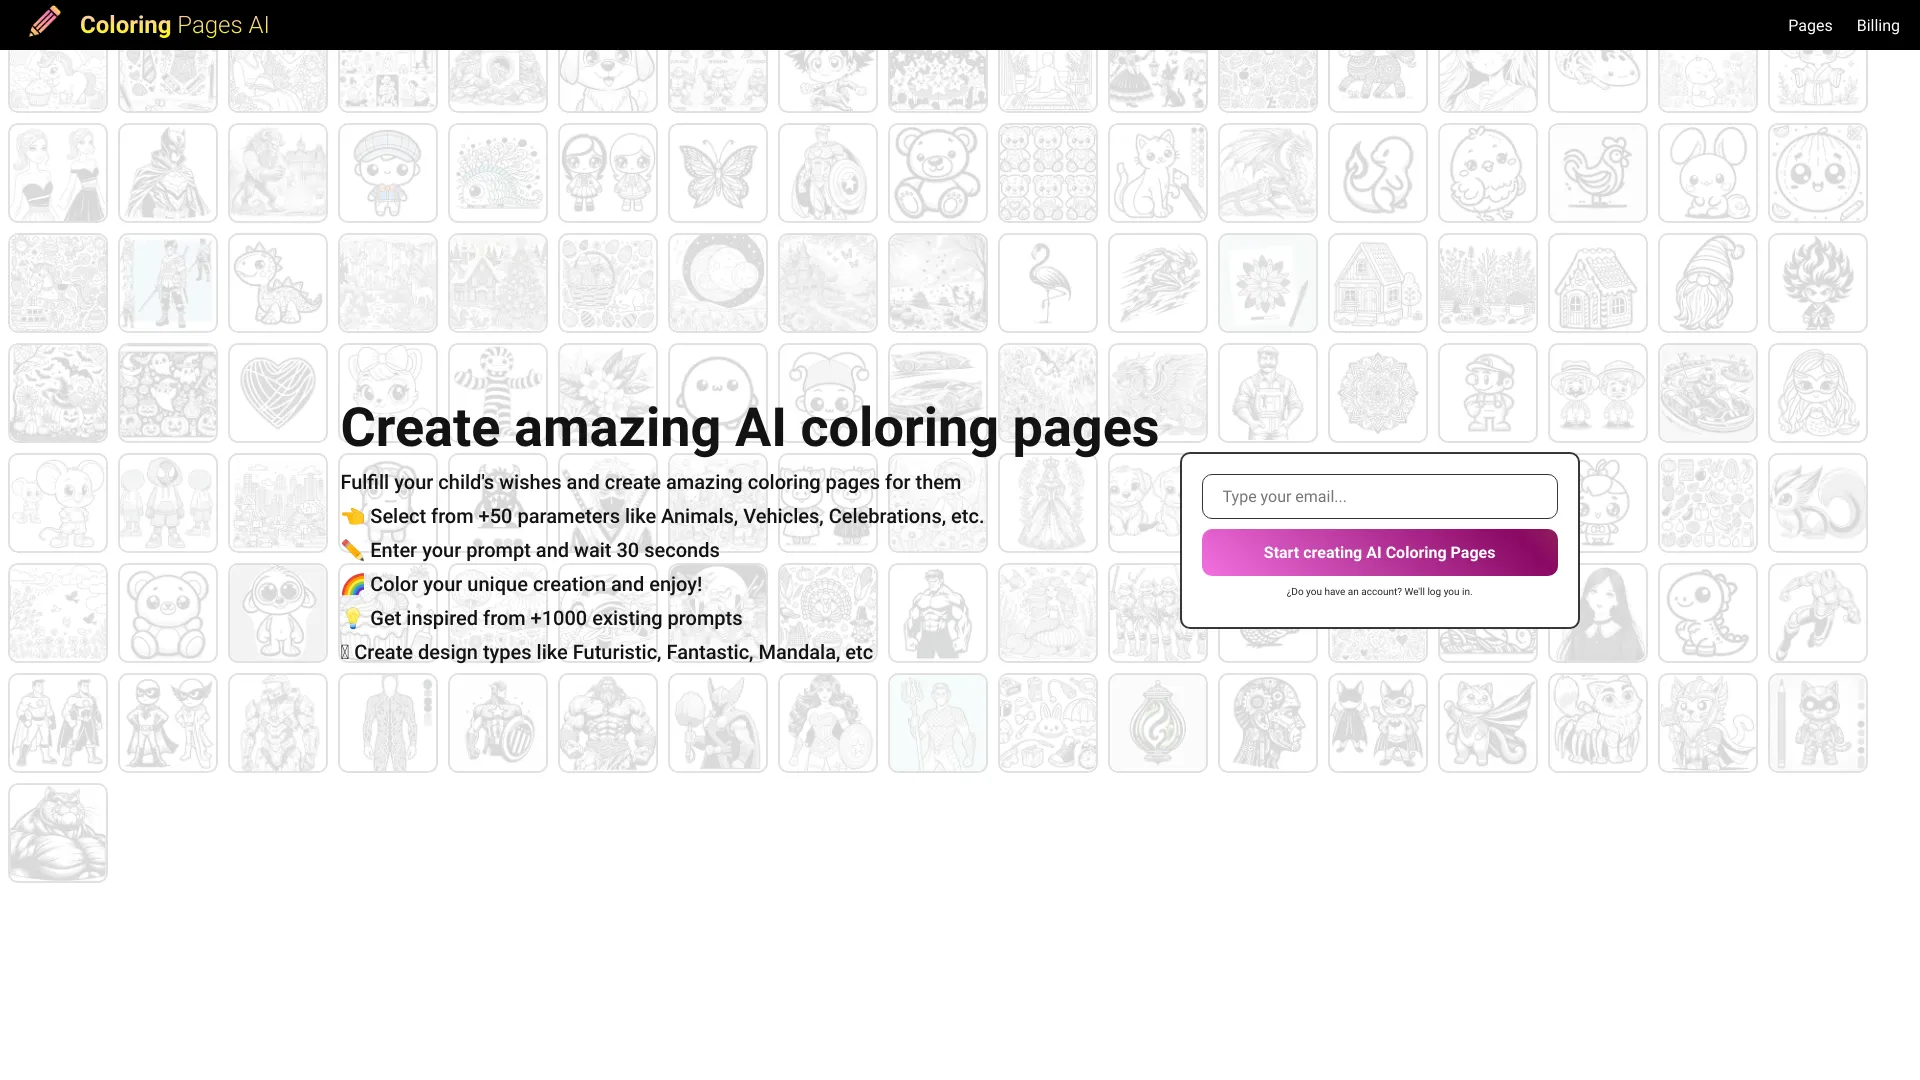 Coloring Pages AI